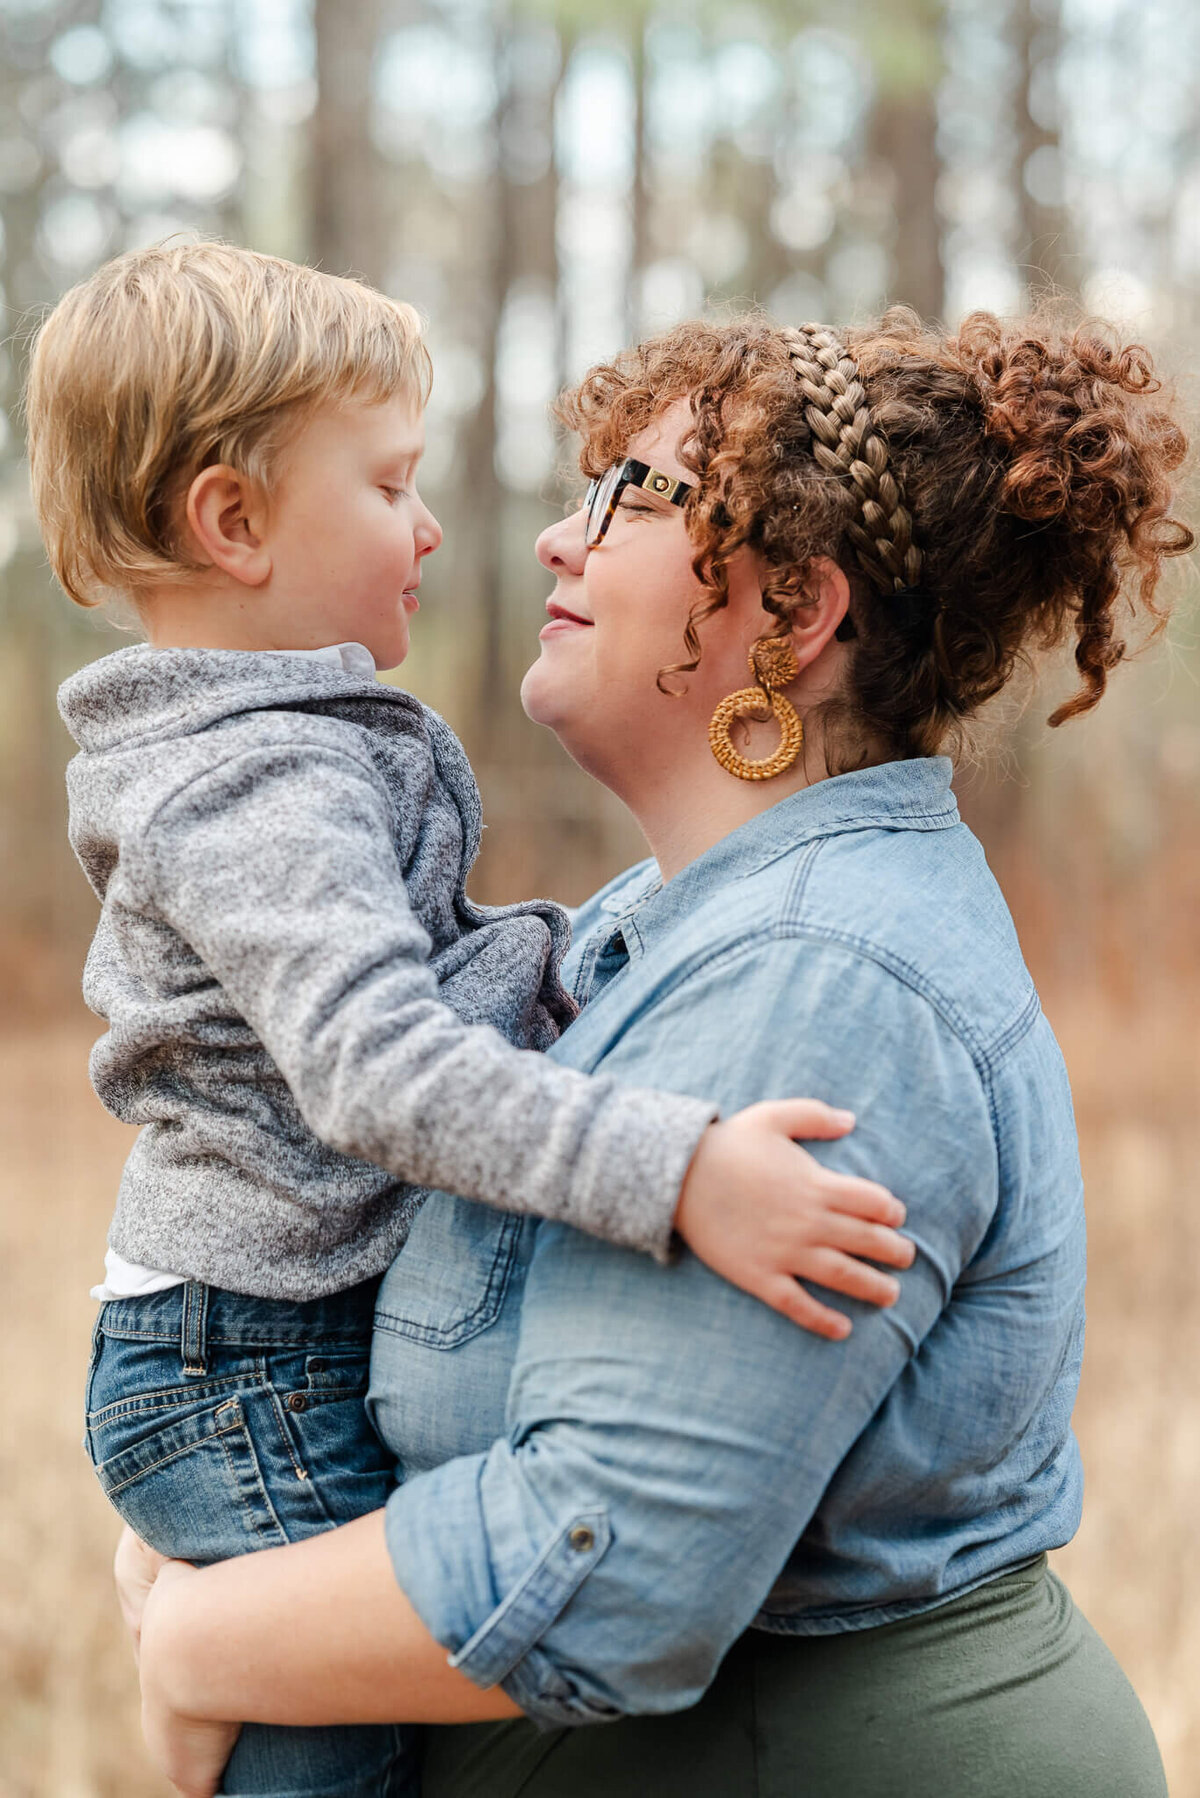 A mother holds her young son during their Norfolk family photography session. They look into each other's eyes and smile.